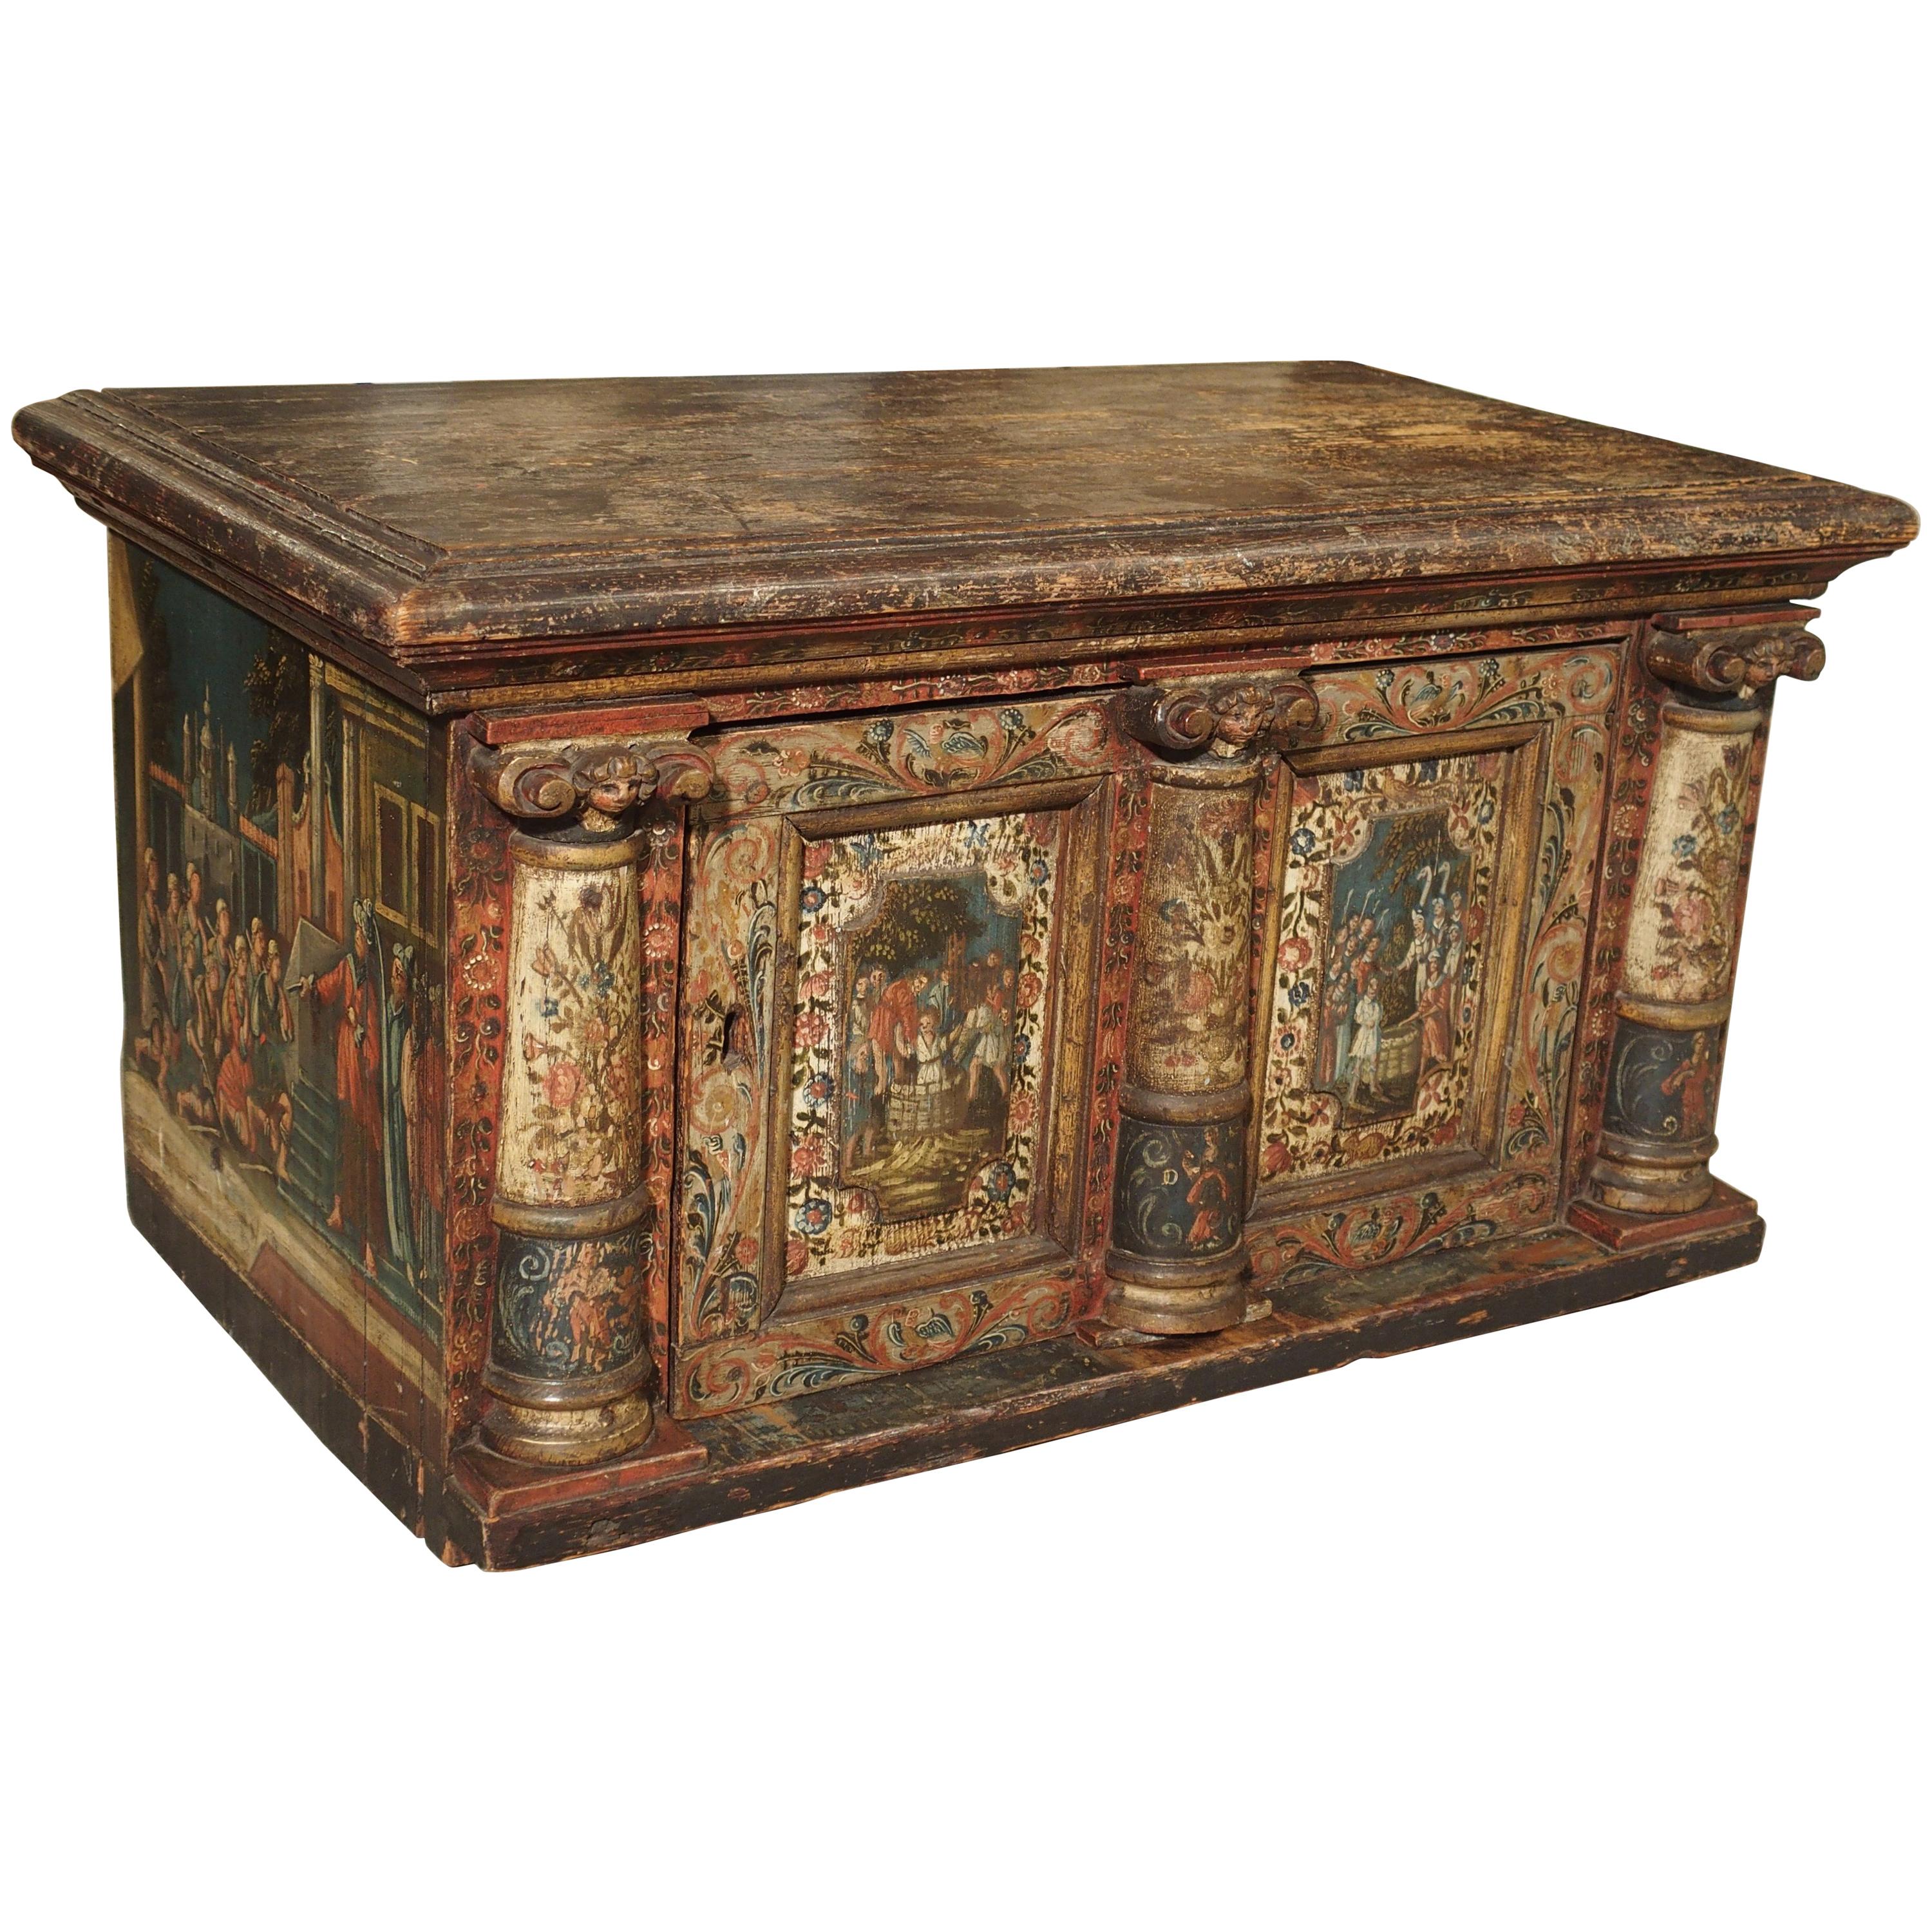 Rare 18th Century Painted Table Cabinet from Southern Germany